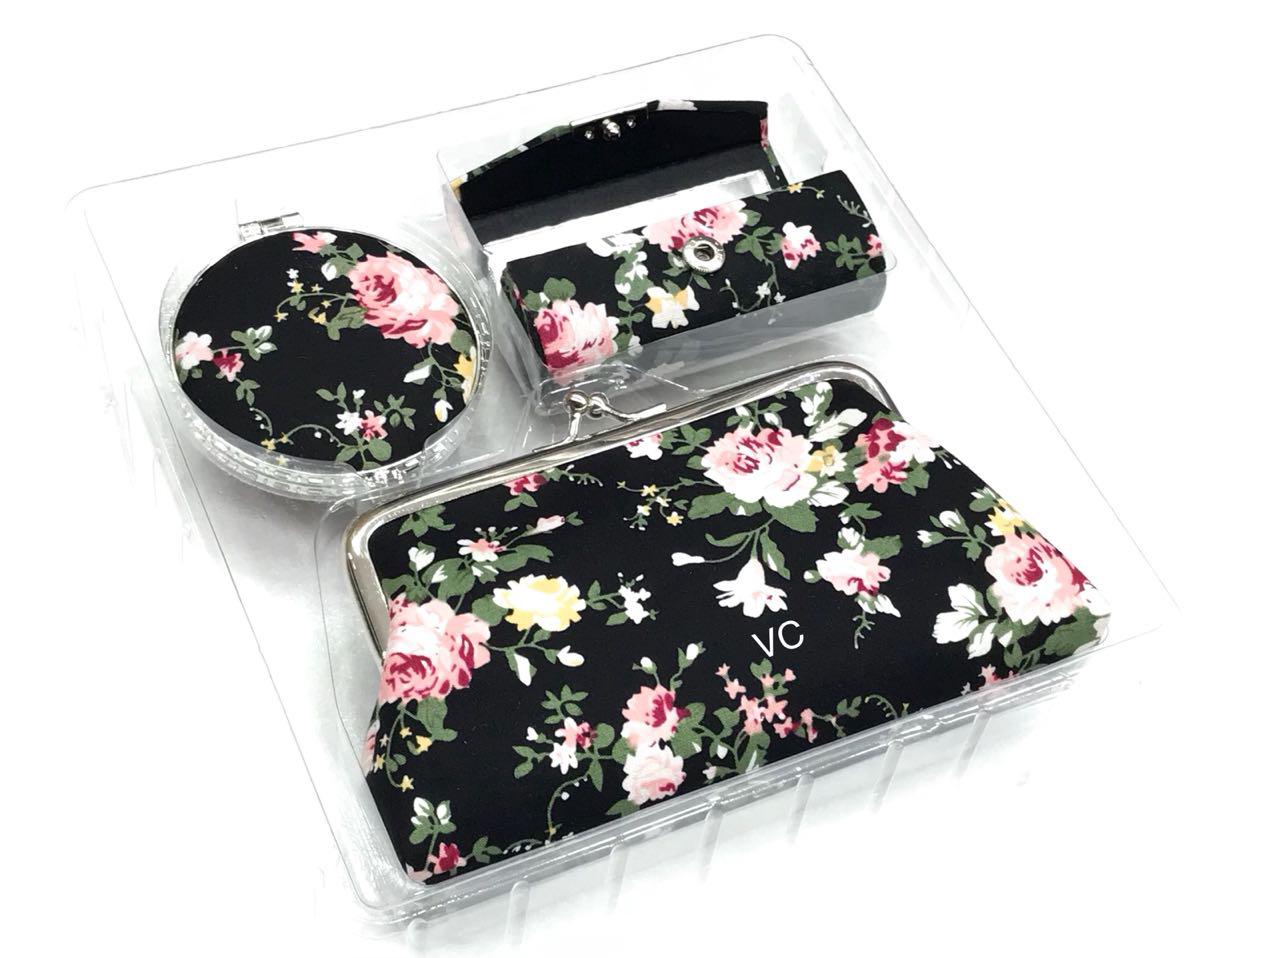 Mirror Diy Sticker Artificial Diamond Lipstick Bag Protective Case Makeup  Bag Gift Gift, Free Shipping For New Users